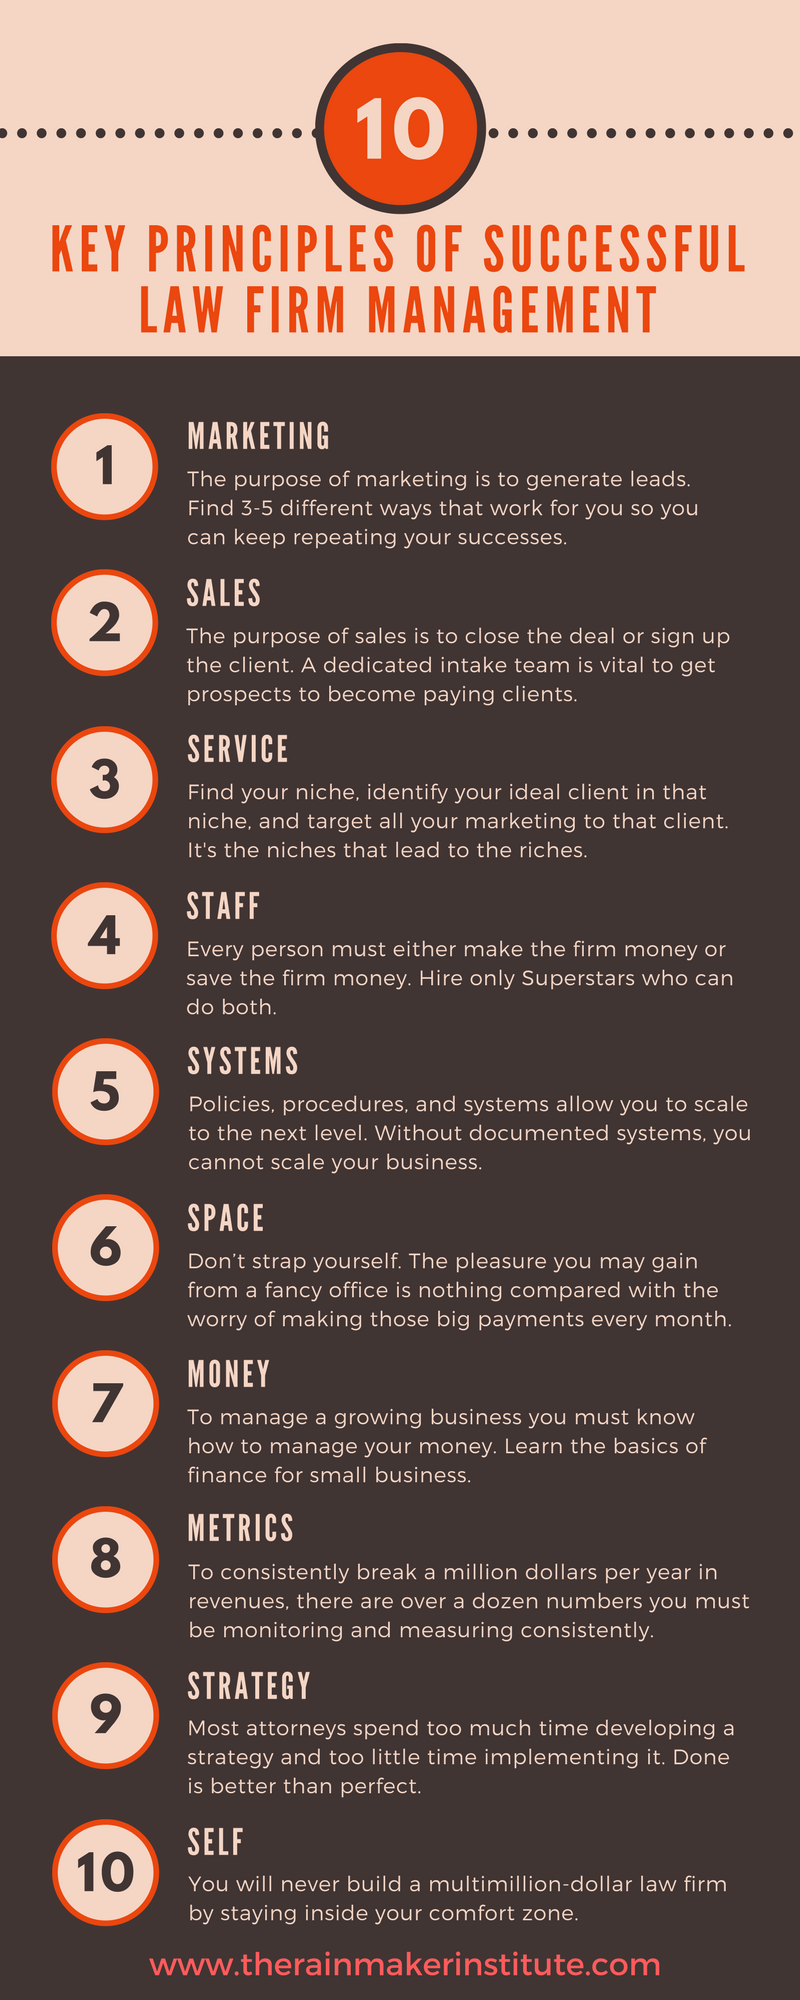 The 10 Keys to Successful Law Firm Management [INFOGRAPHIC]